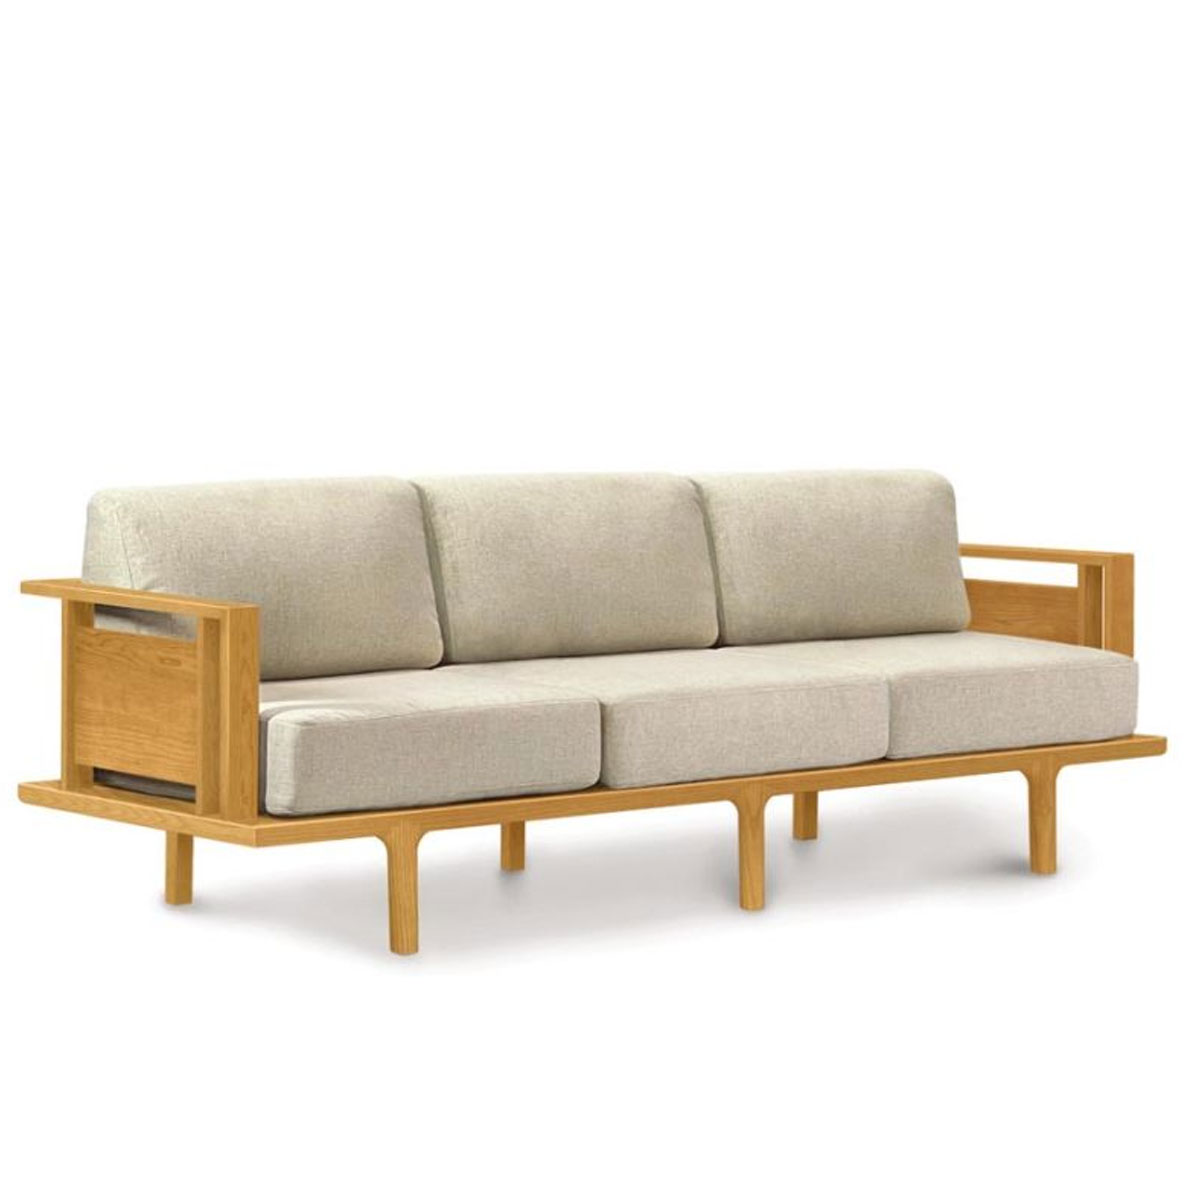 Copeland Sierra Sofa with Wood Panels in Cherry